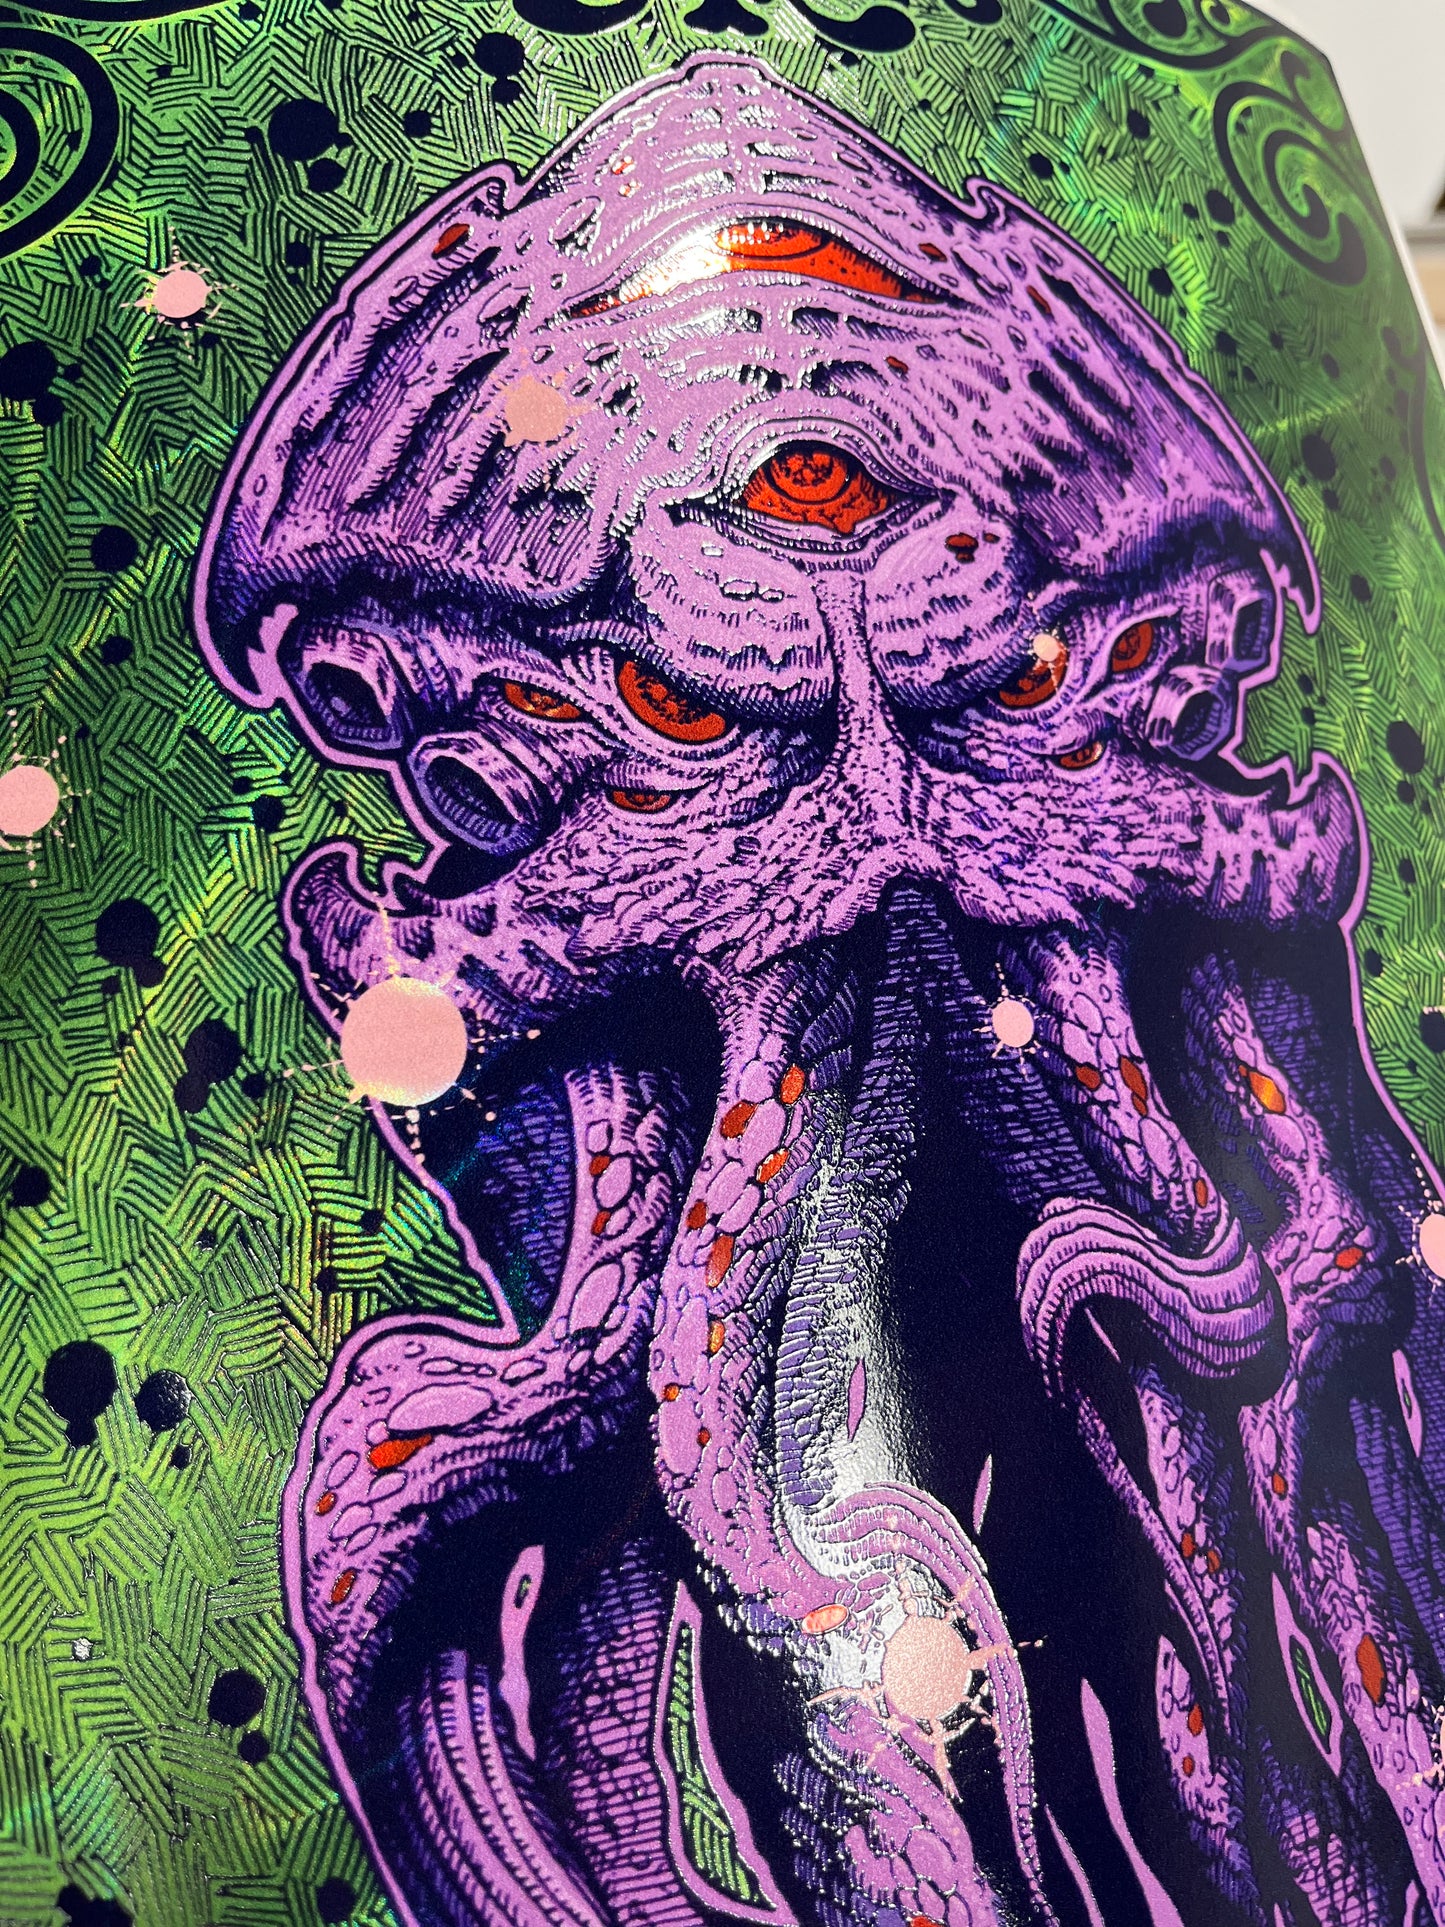 “Cthulhu Is Coming” 11in x 17in Limited Edition Foil Print